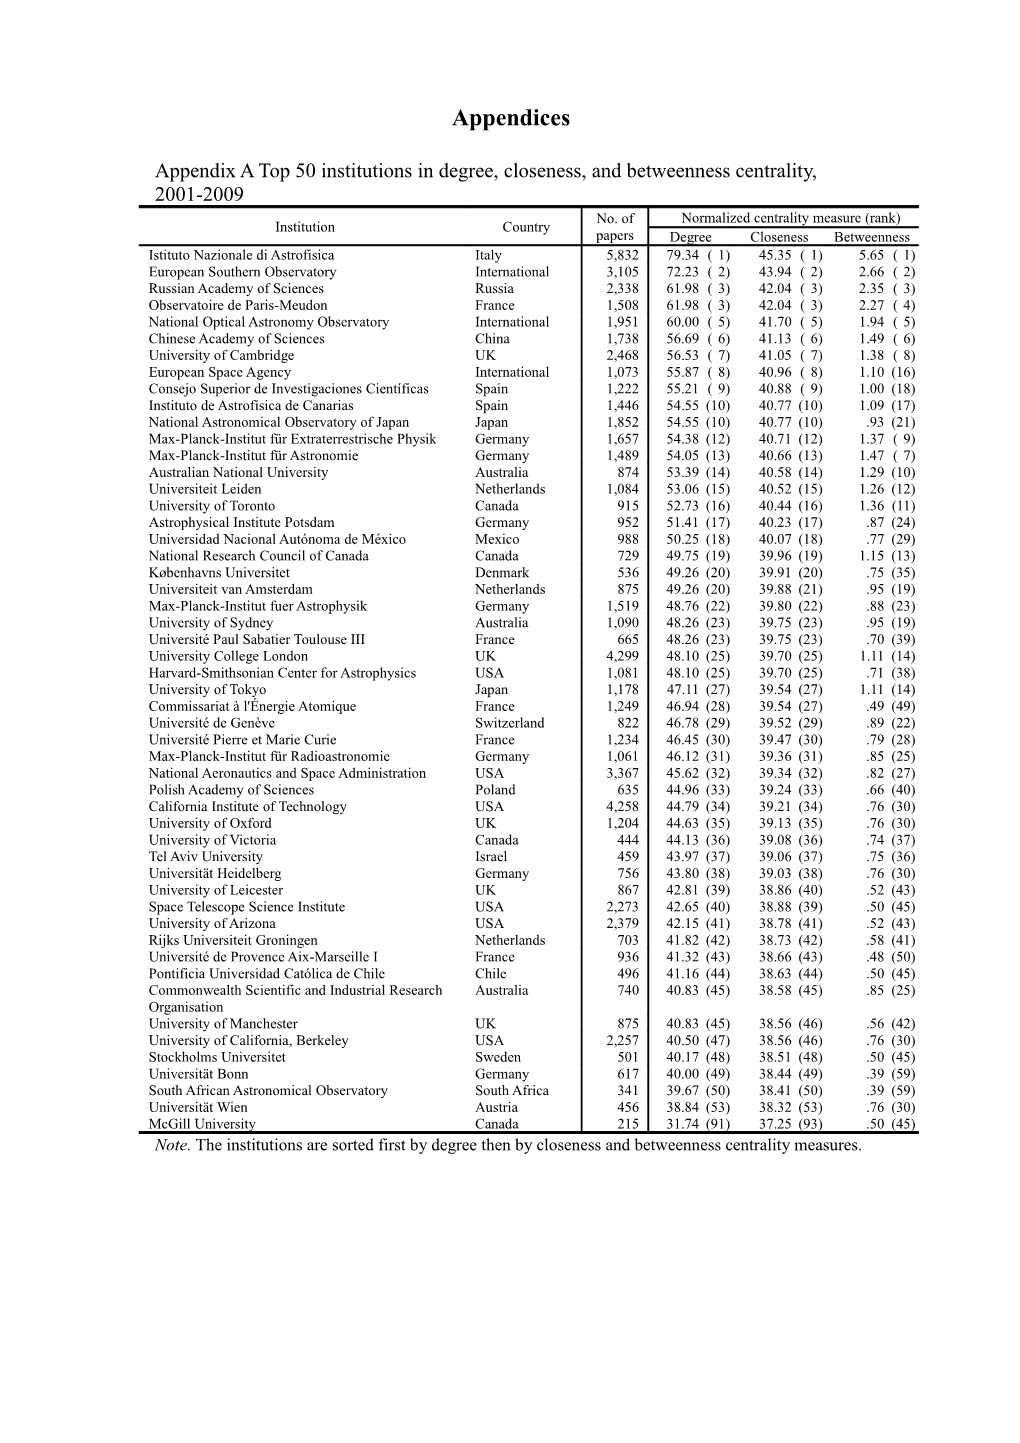 Appendix a Top 50 Institutions in Degree, Closeness, and Betweenness Centrality, 2001-2009